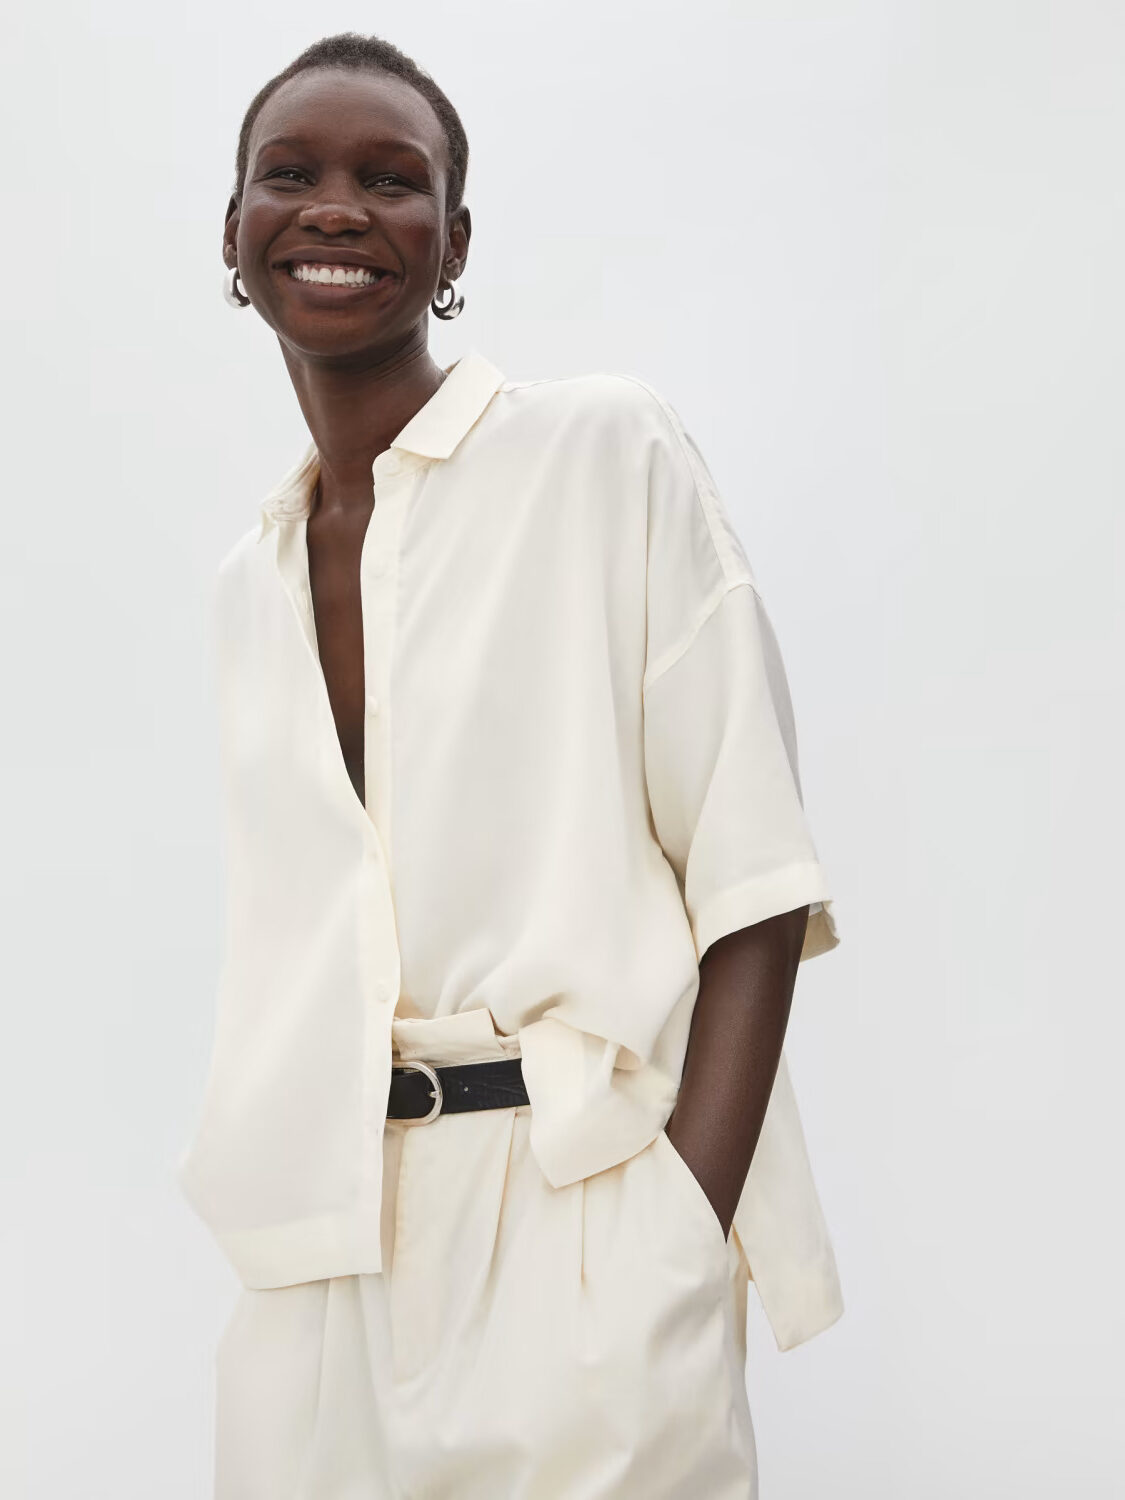 Fashionable woman in an ivory shirt and trousers, smiling at the camera with a minimalist white background.